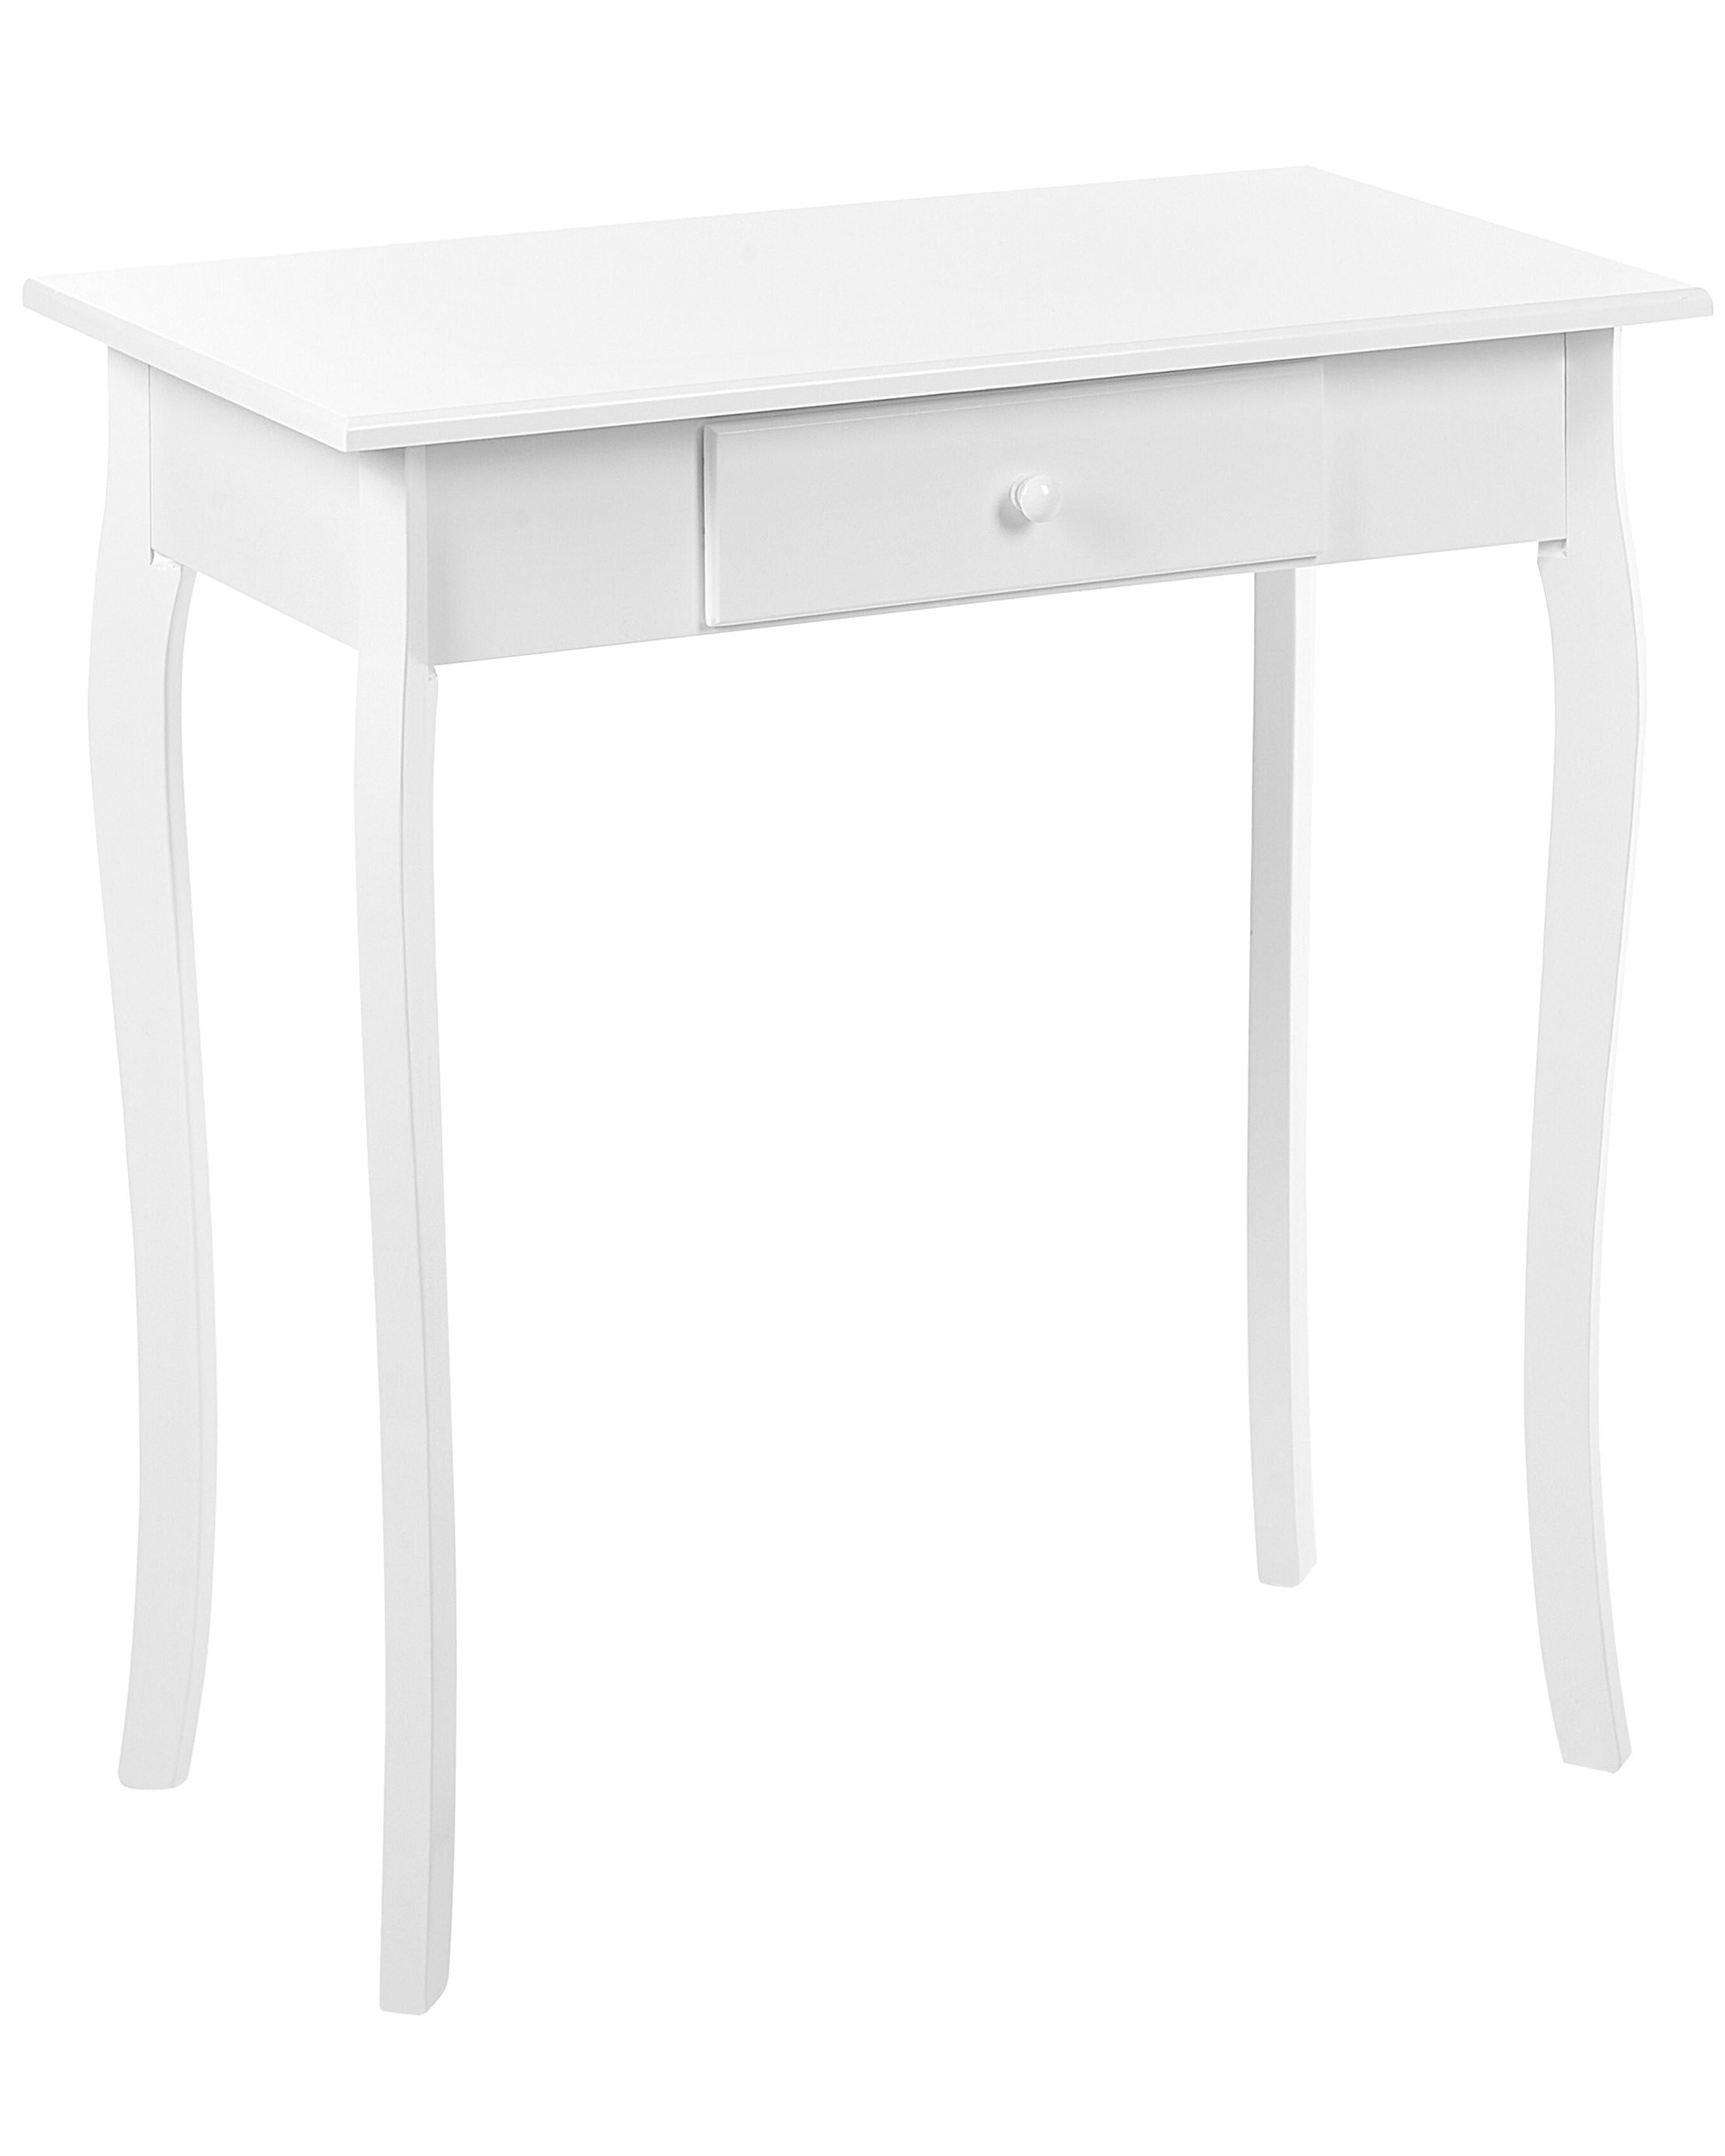 1 Drawer Console Table White ALBIA_848821